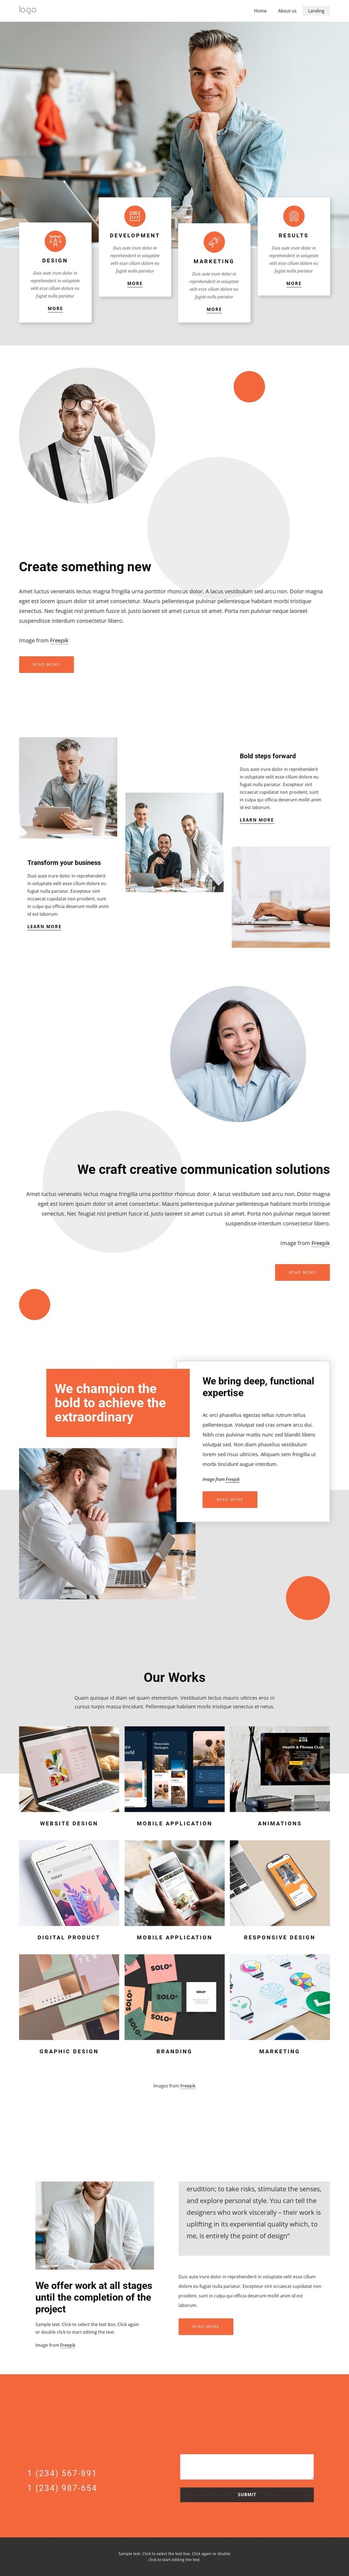 Crafting digital experiences: Web Page Design